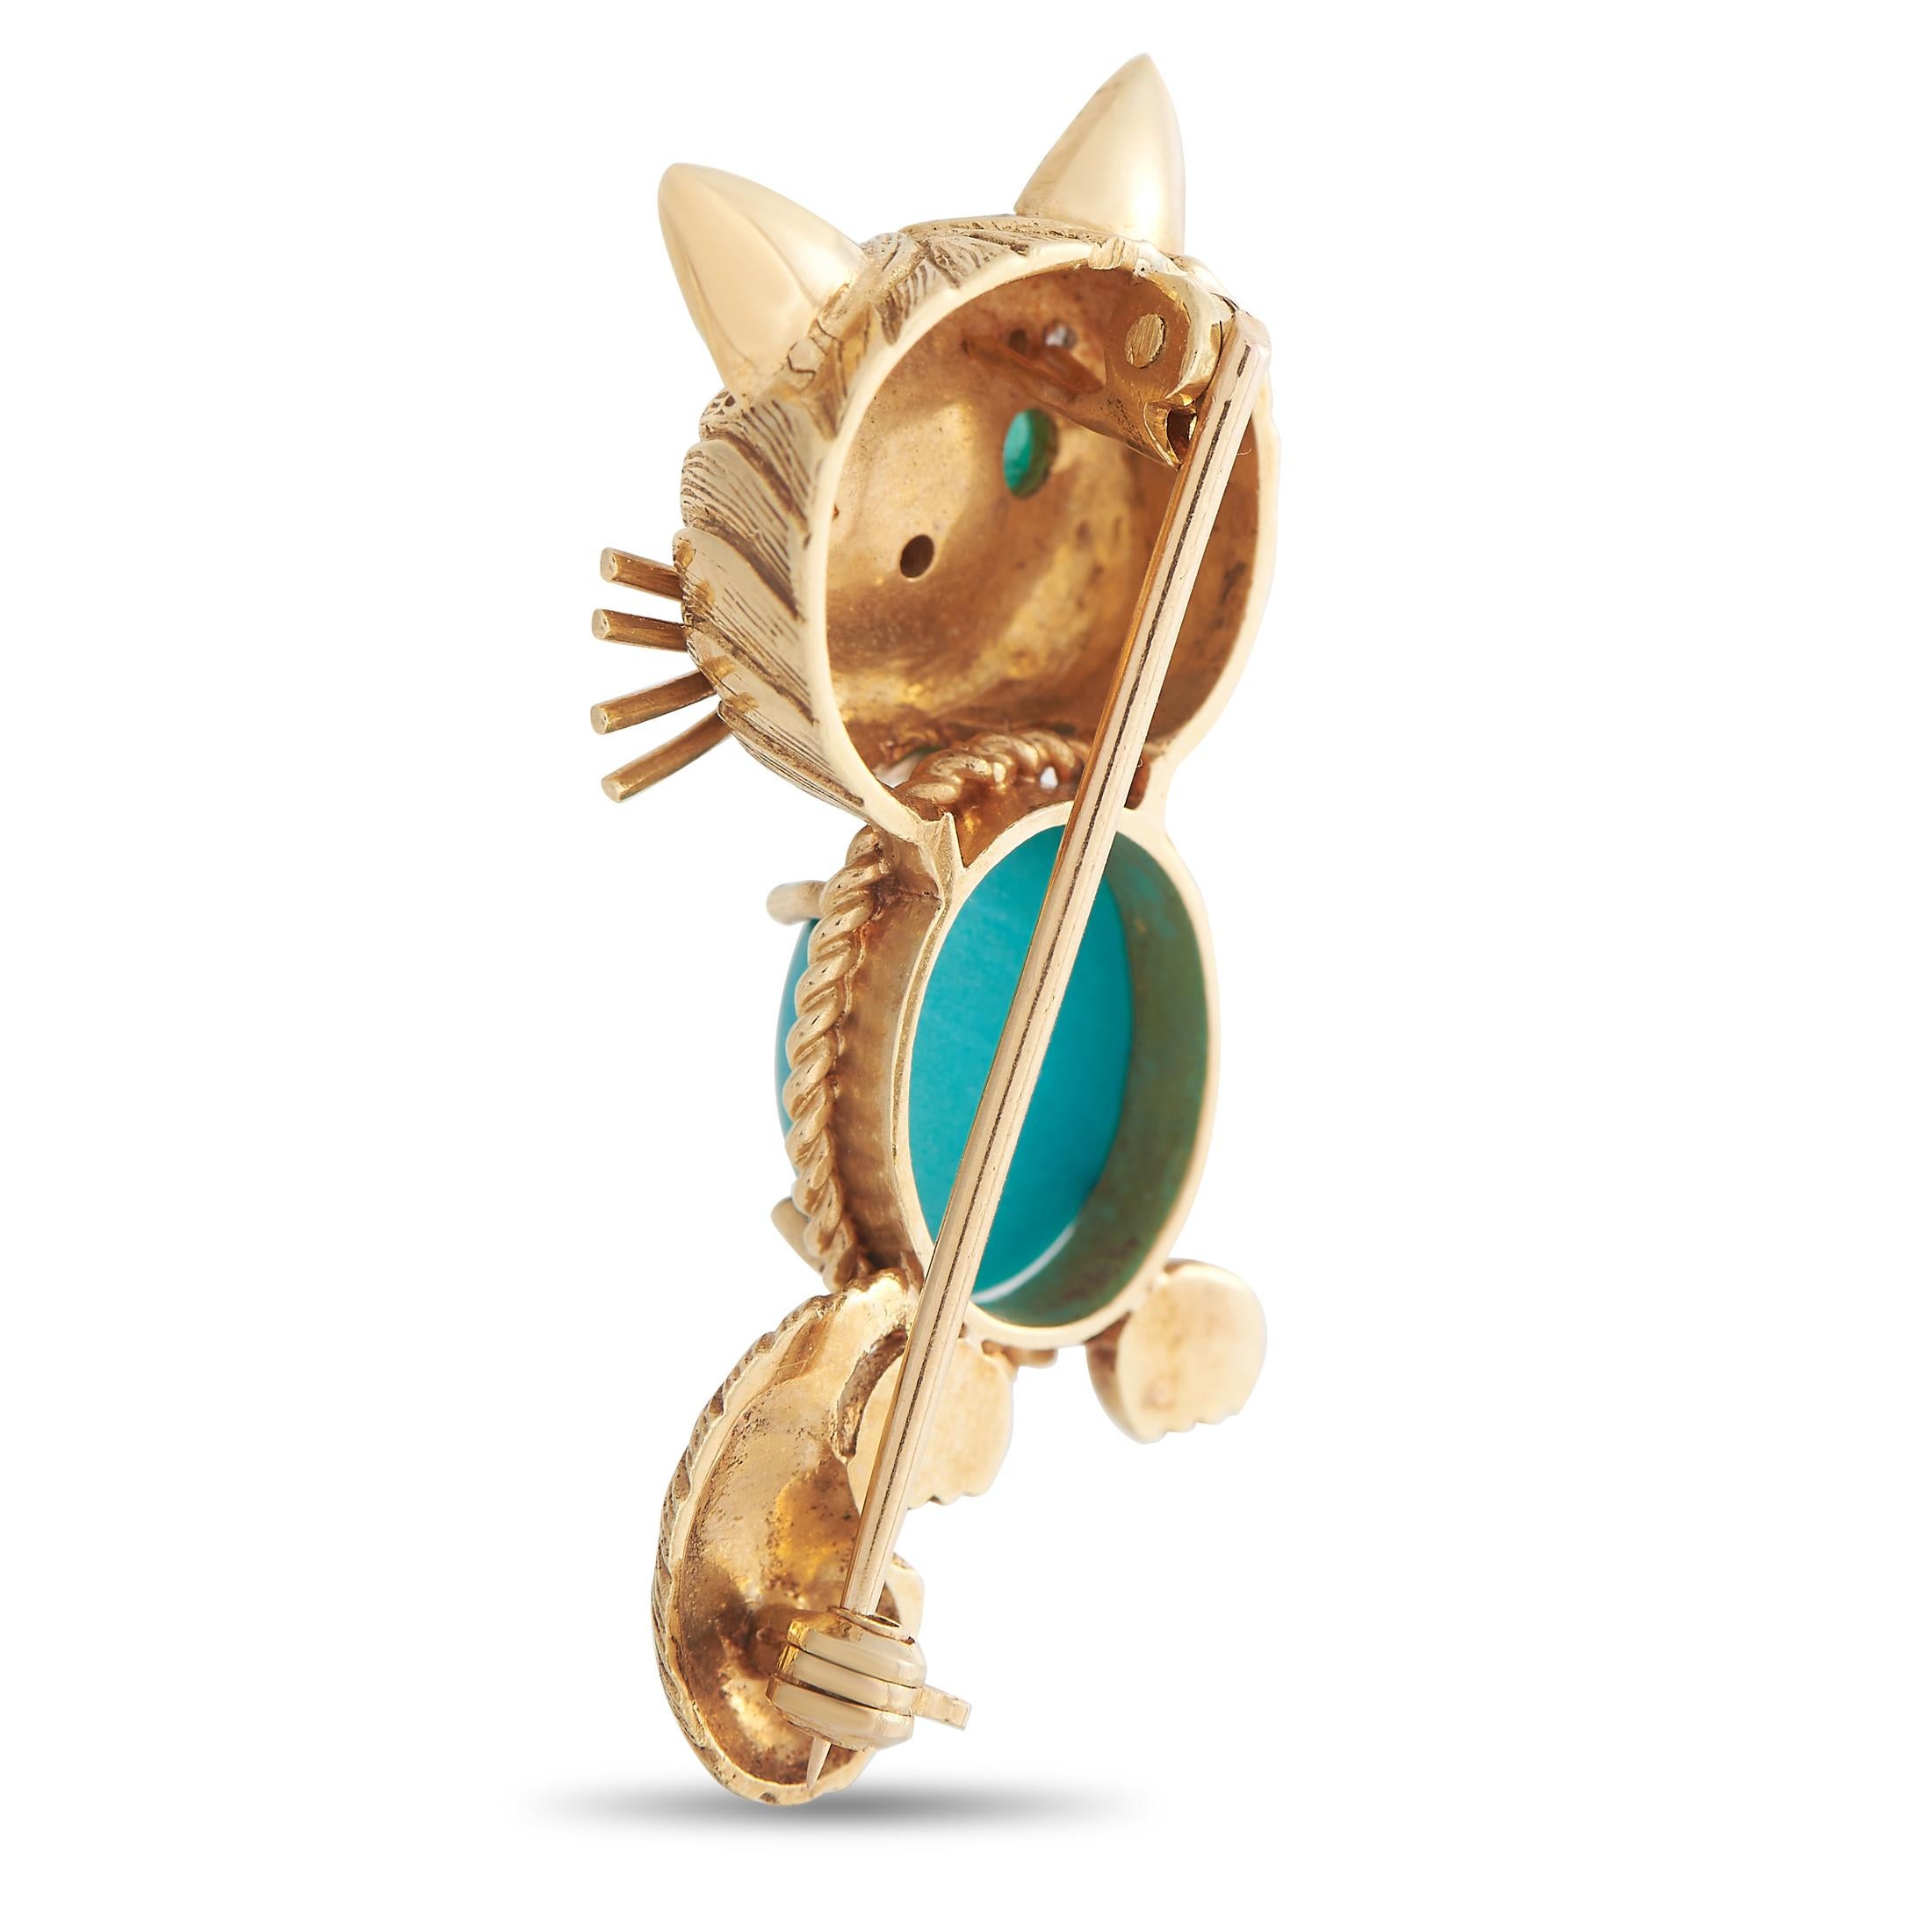 This charming cat-shaped brooch will earn you endless compliments. A brilliant Turquoise cabochon makes a statement at the center, while sparkling Diamond accents, an Emerald “eye,” and a Ruby “nose” make it even more distinguished. Crafted from